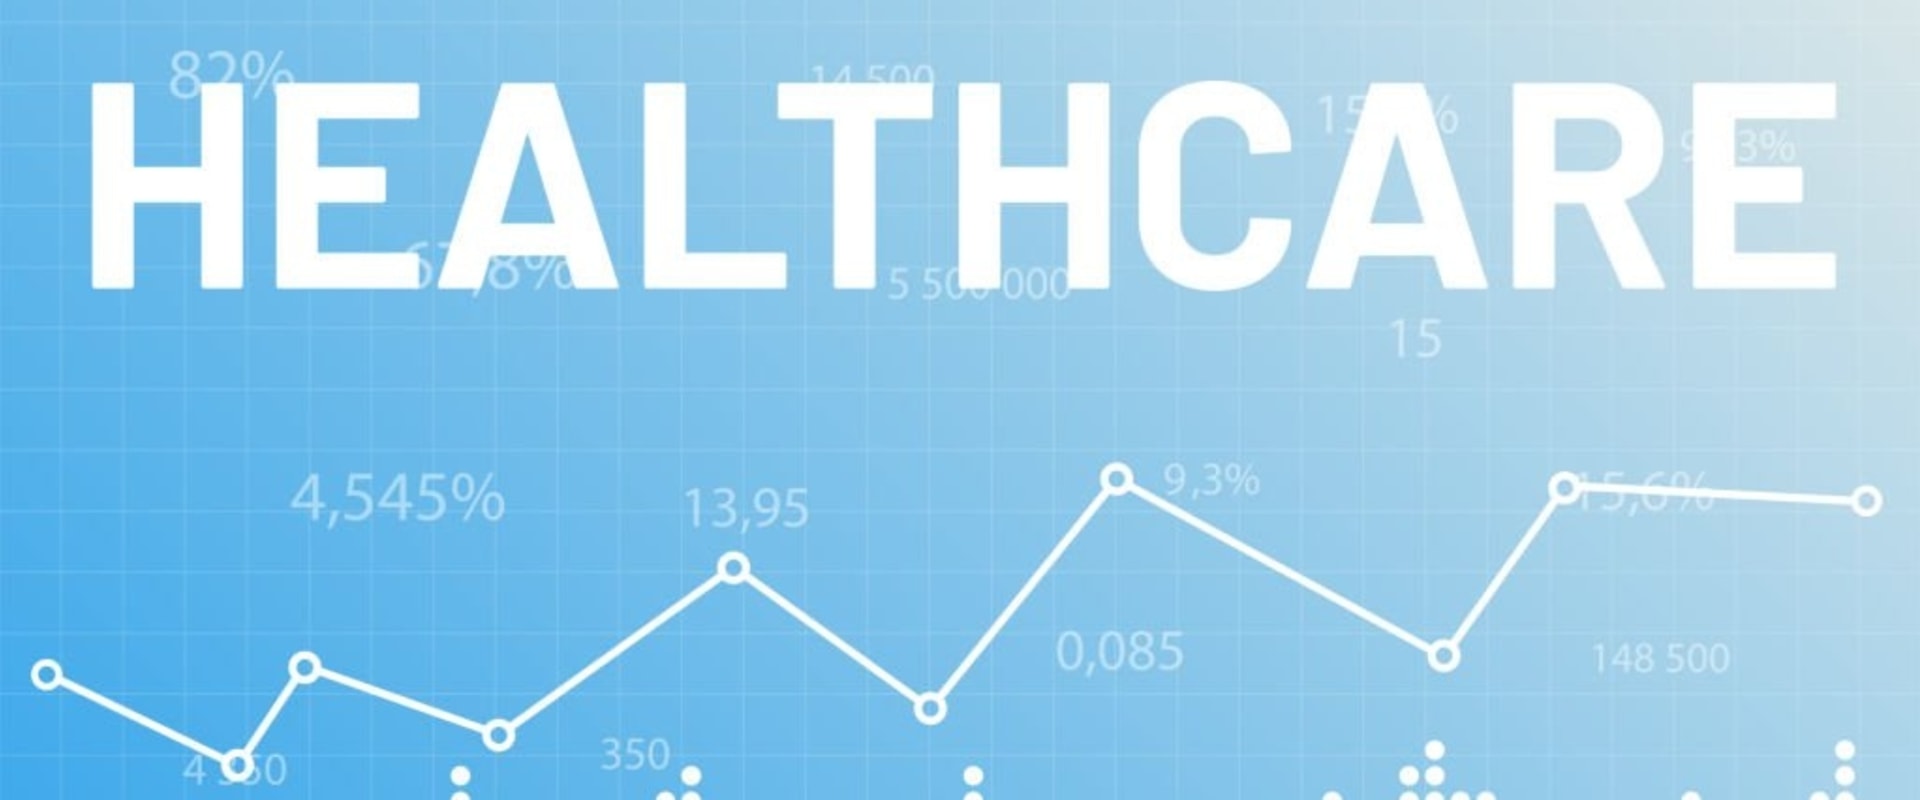 What is causing rising healthcare costs?